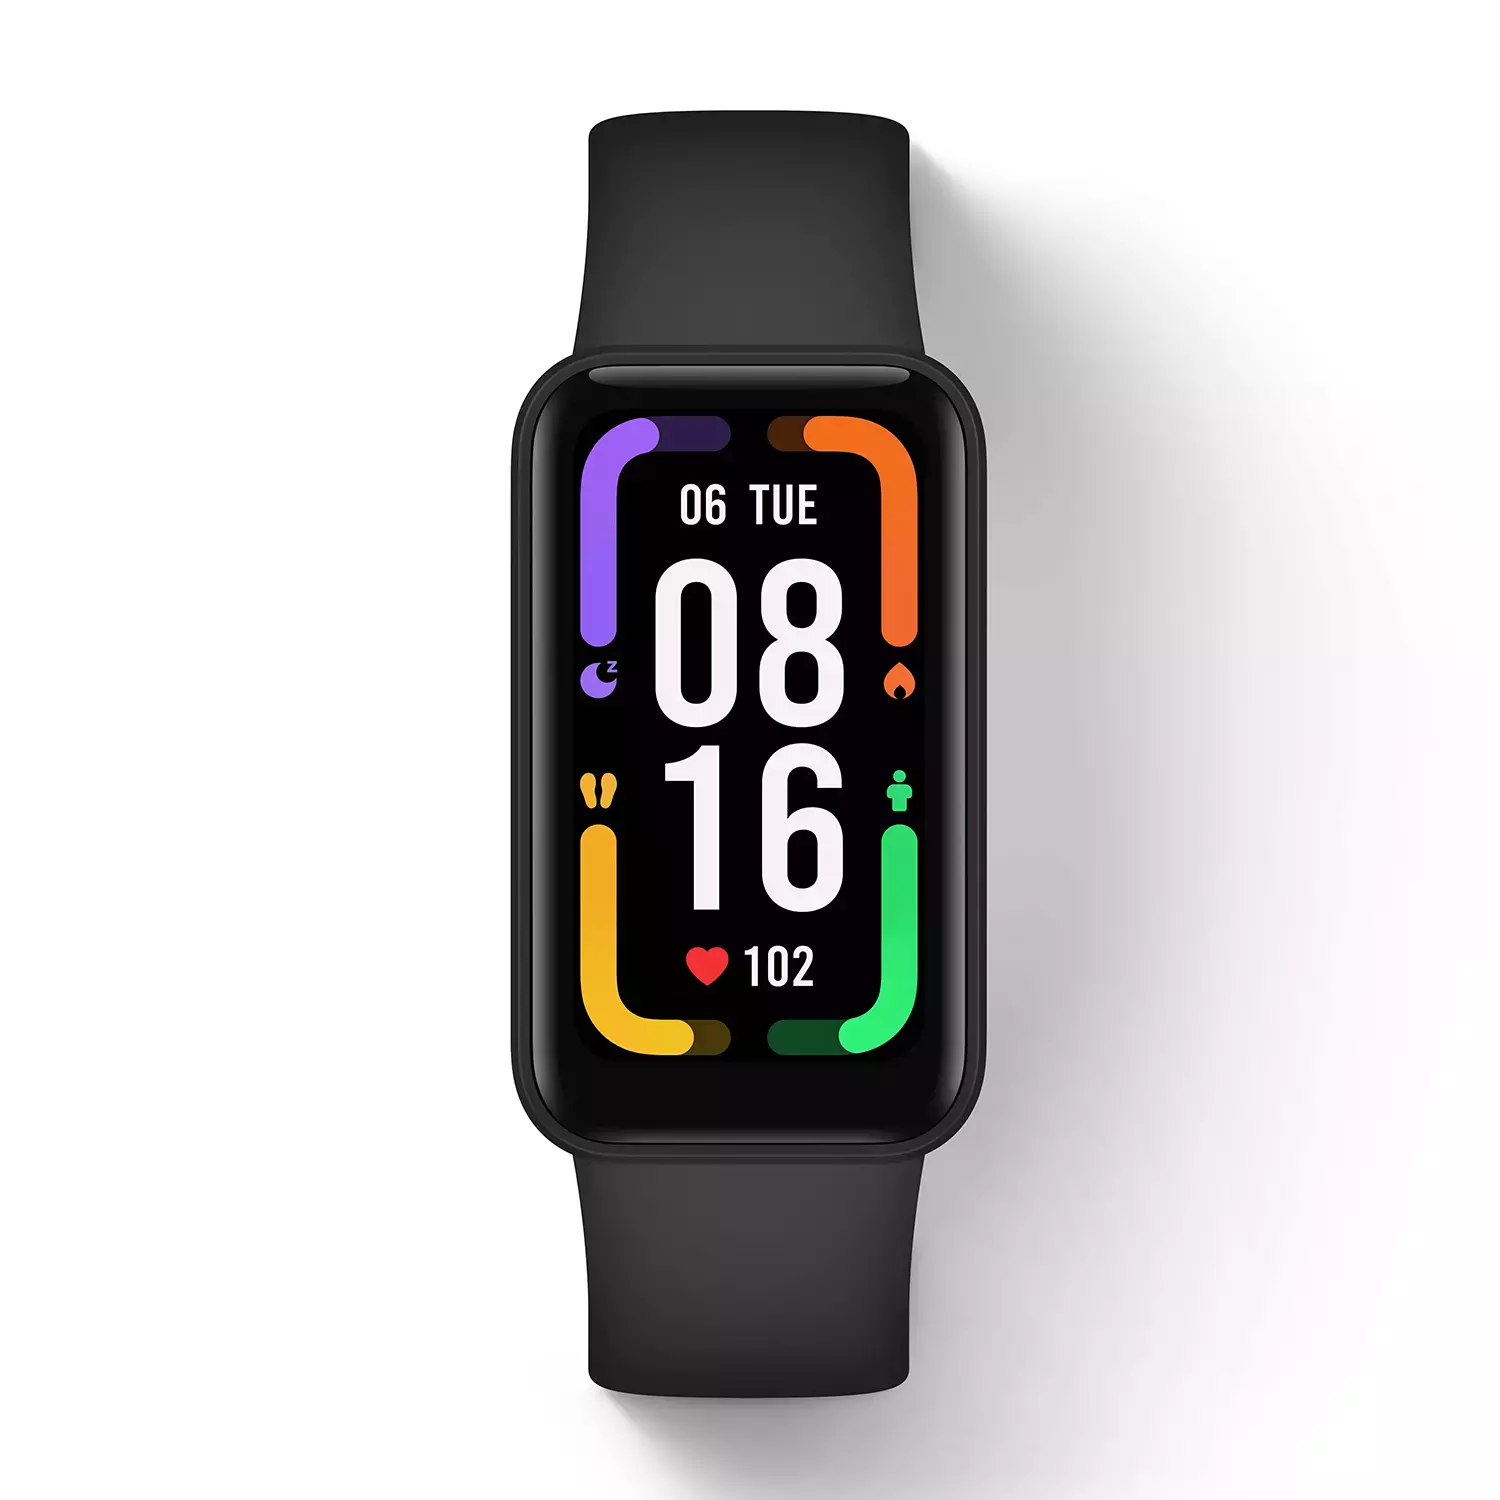 The Redmi Smart Band Pro Is a Mi Band 6 With a Bigger Display